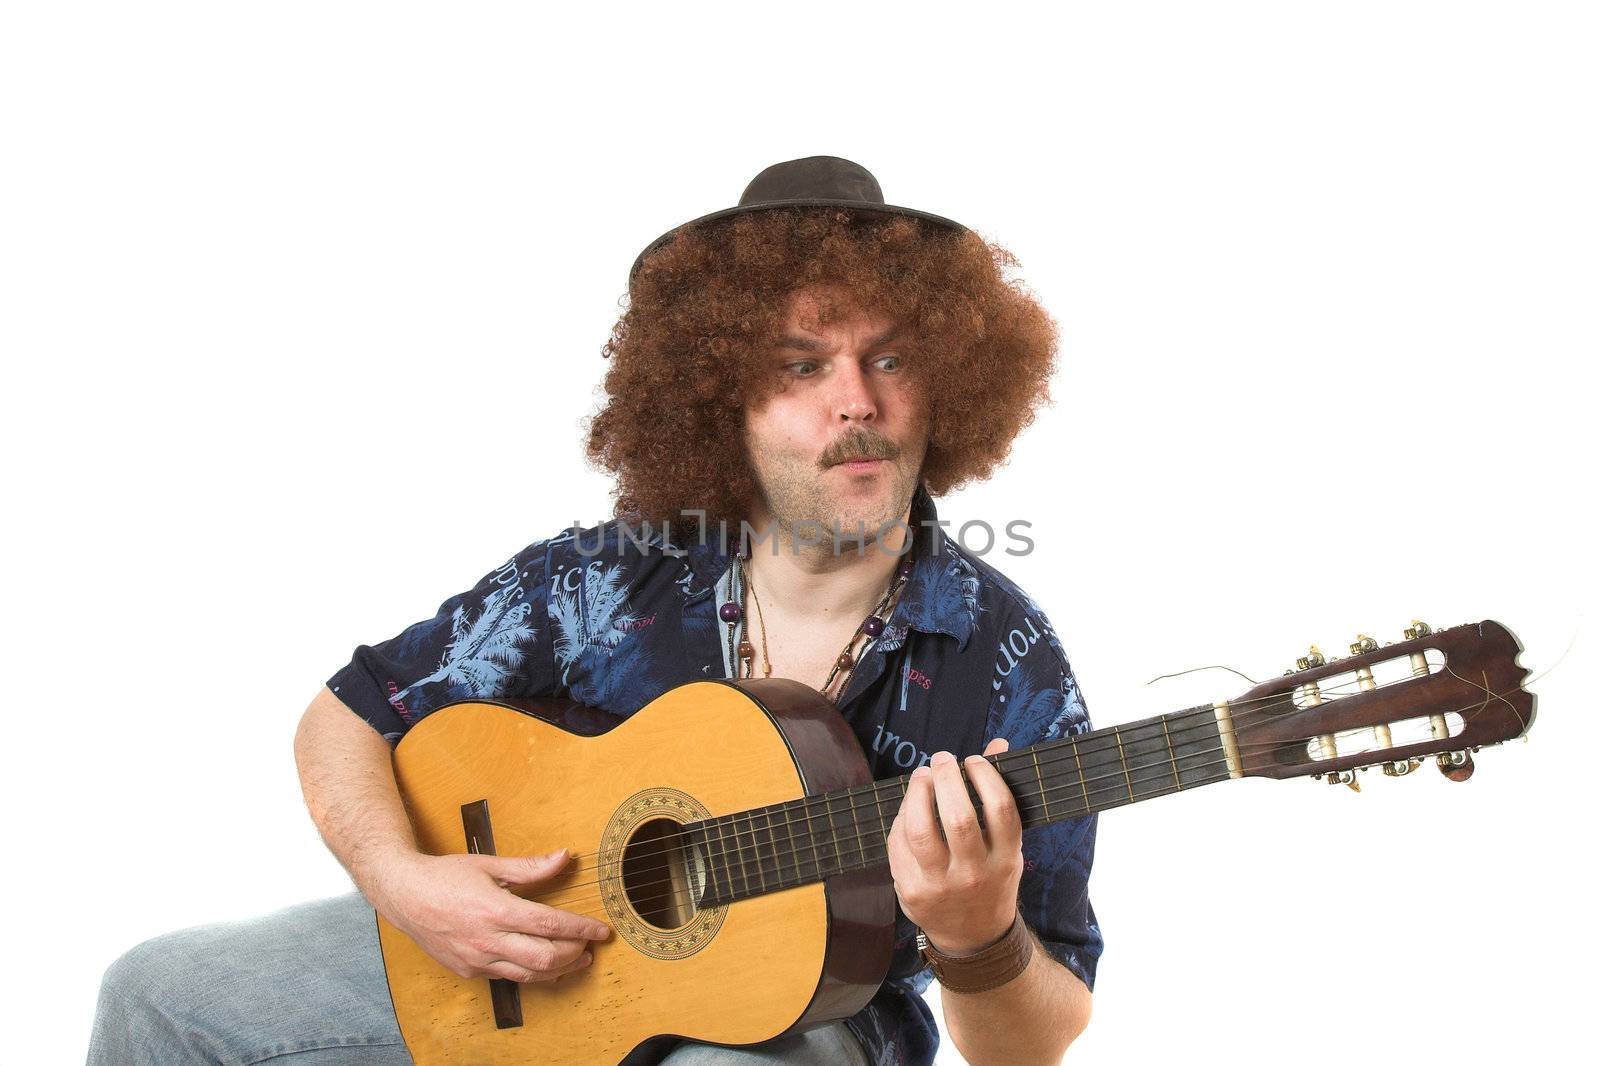 Man with afro hair and guitar